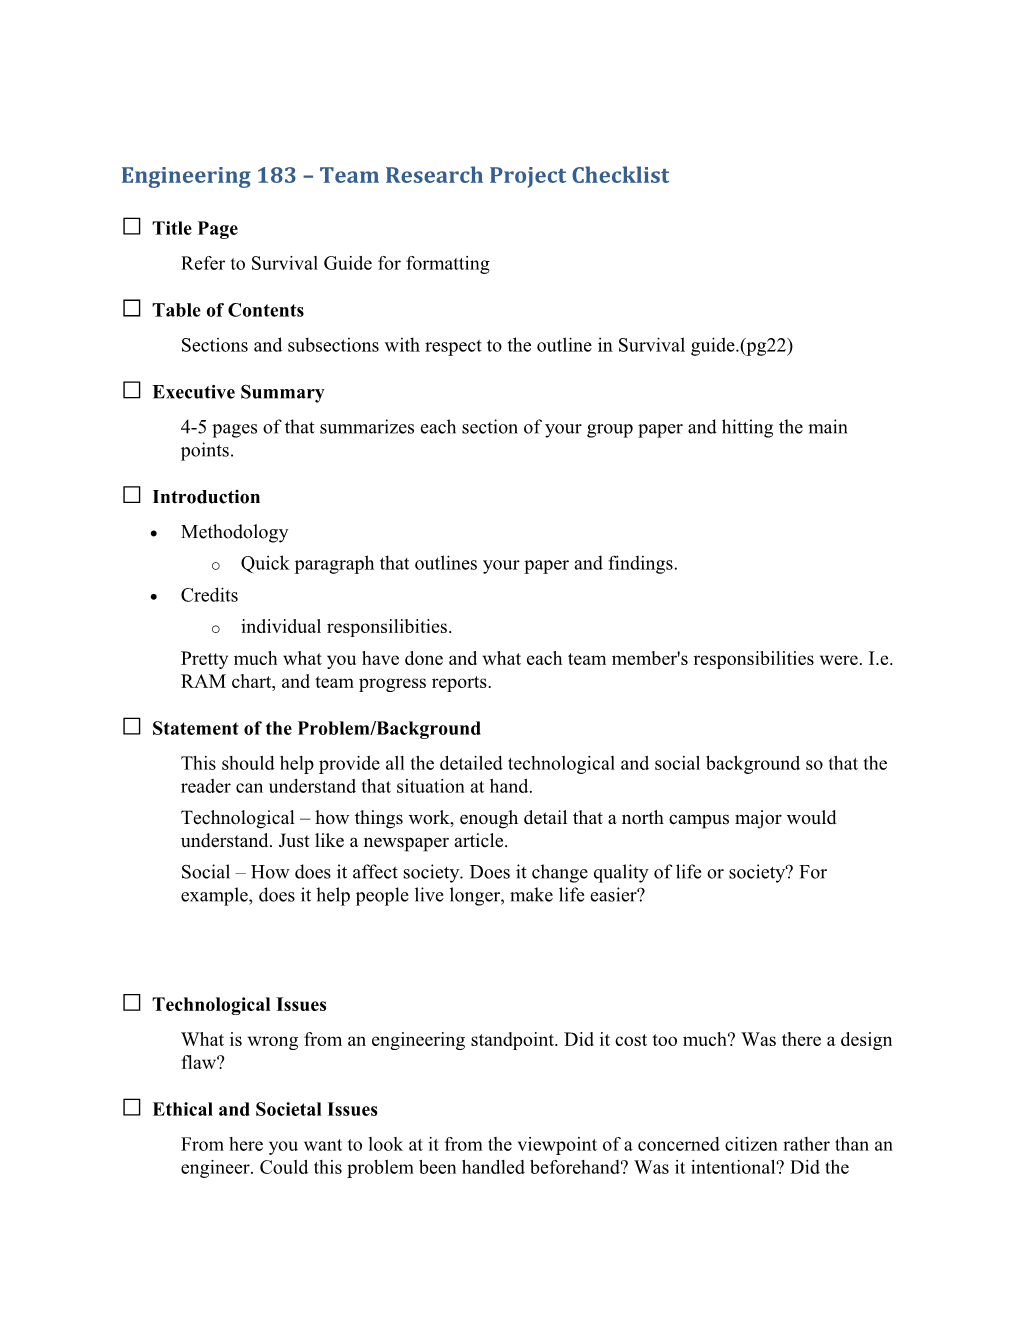 Engineering 183 Team Research Project Checklist